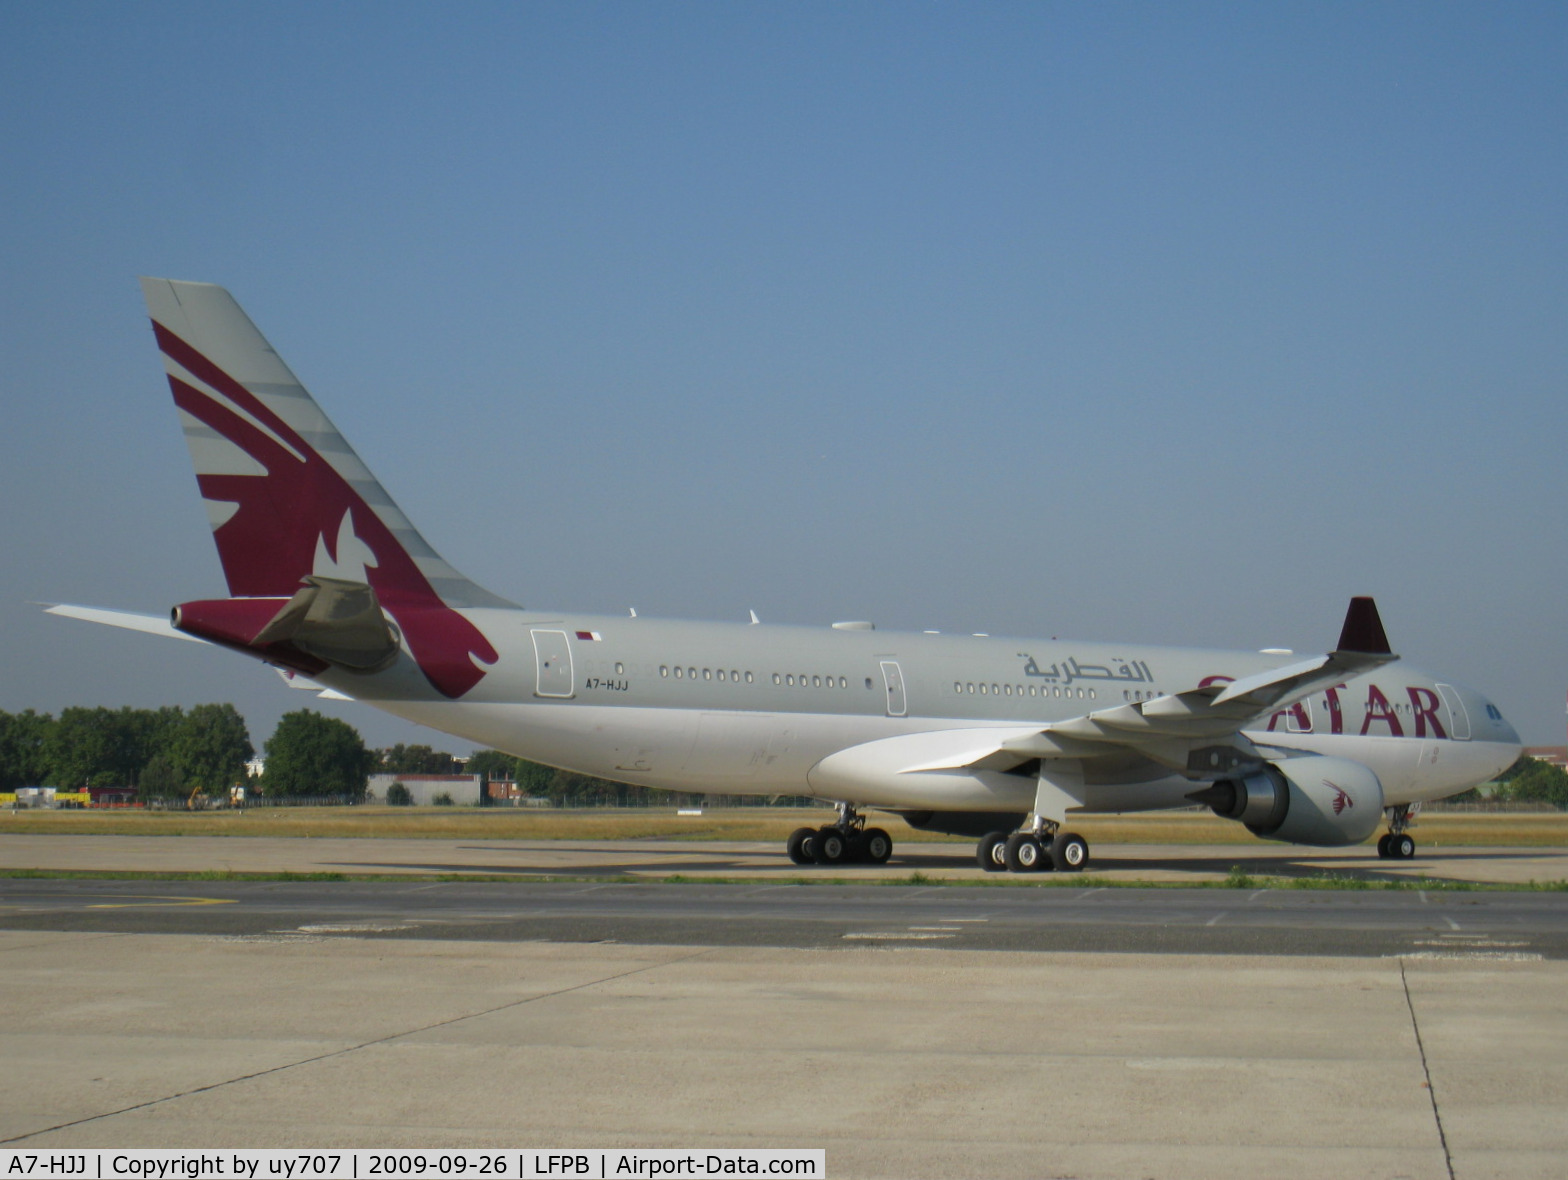 A7-HJJ, 2002 Airbus A330-203 C/N 487, Qatari Amiri Flight, operated in Qatar Airways' colors, sitting on the remote ramp, departed at 2.30pm